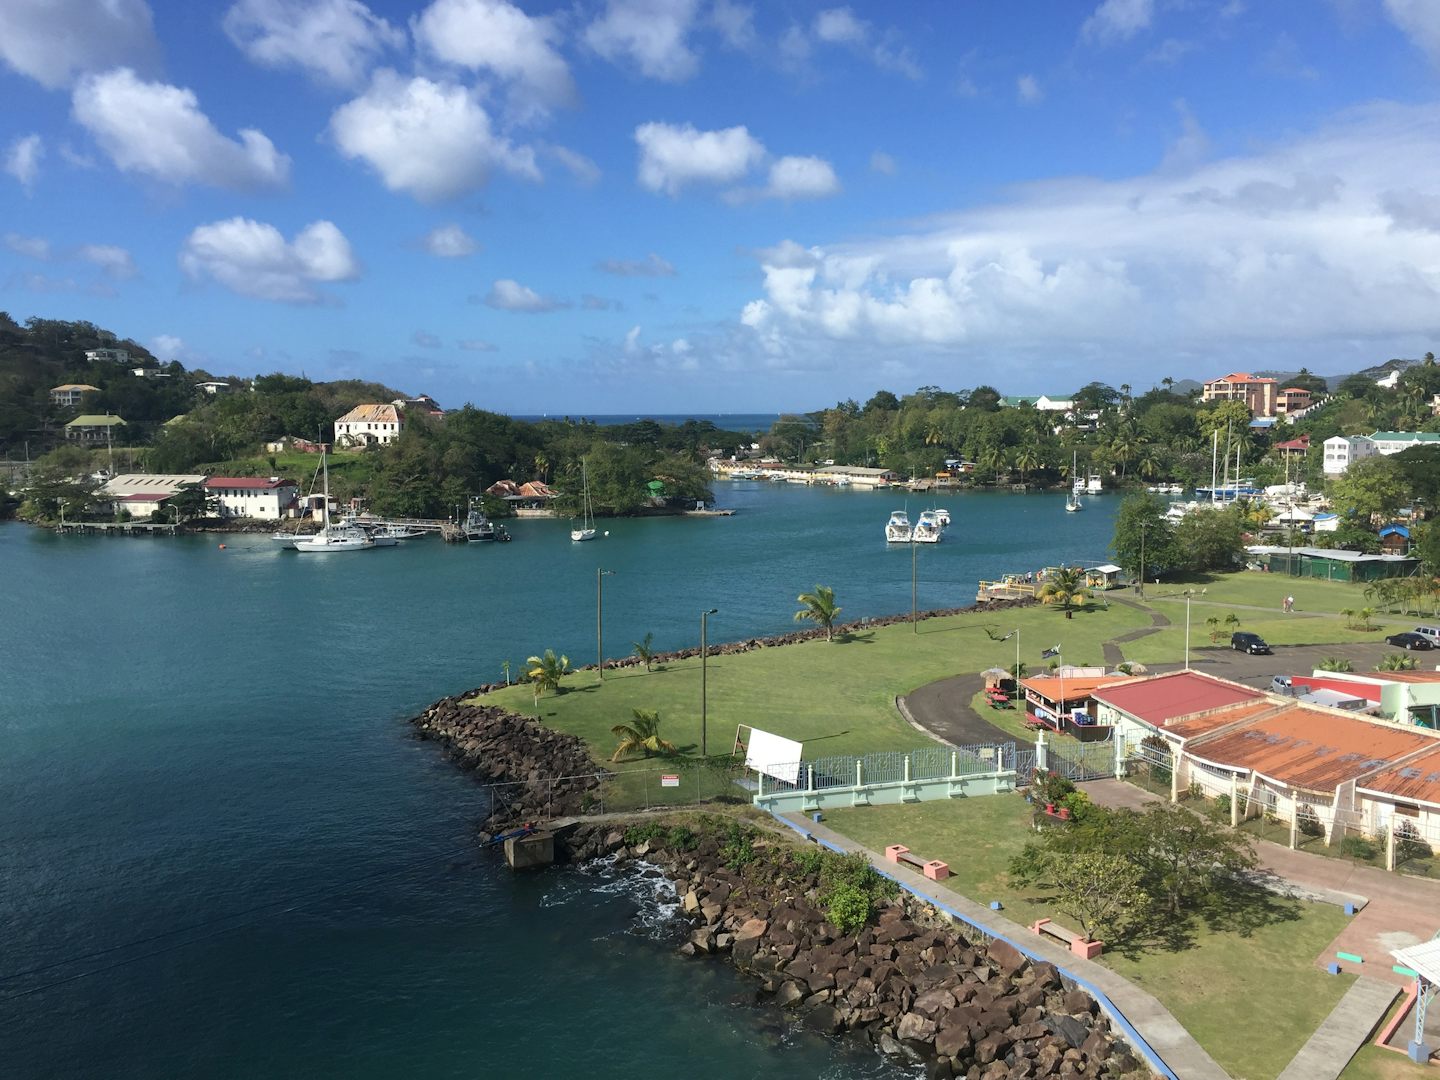 Port of St. Lucia as seen from our balcony.